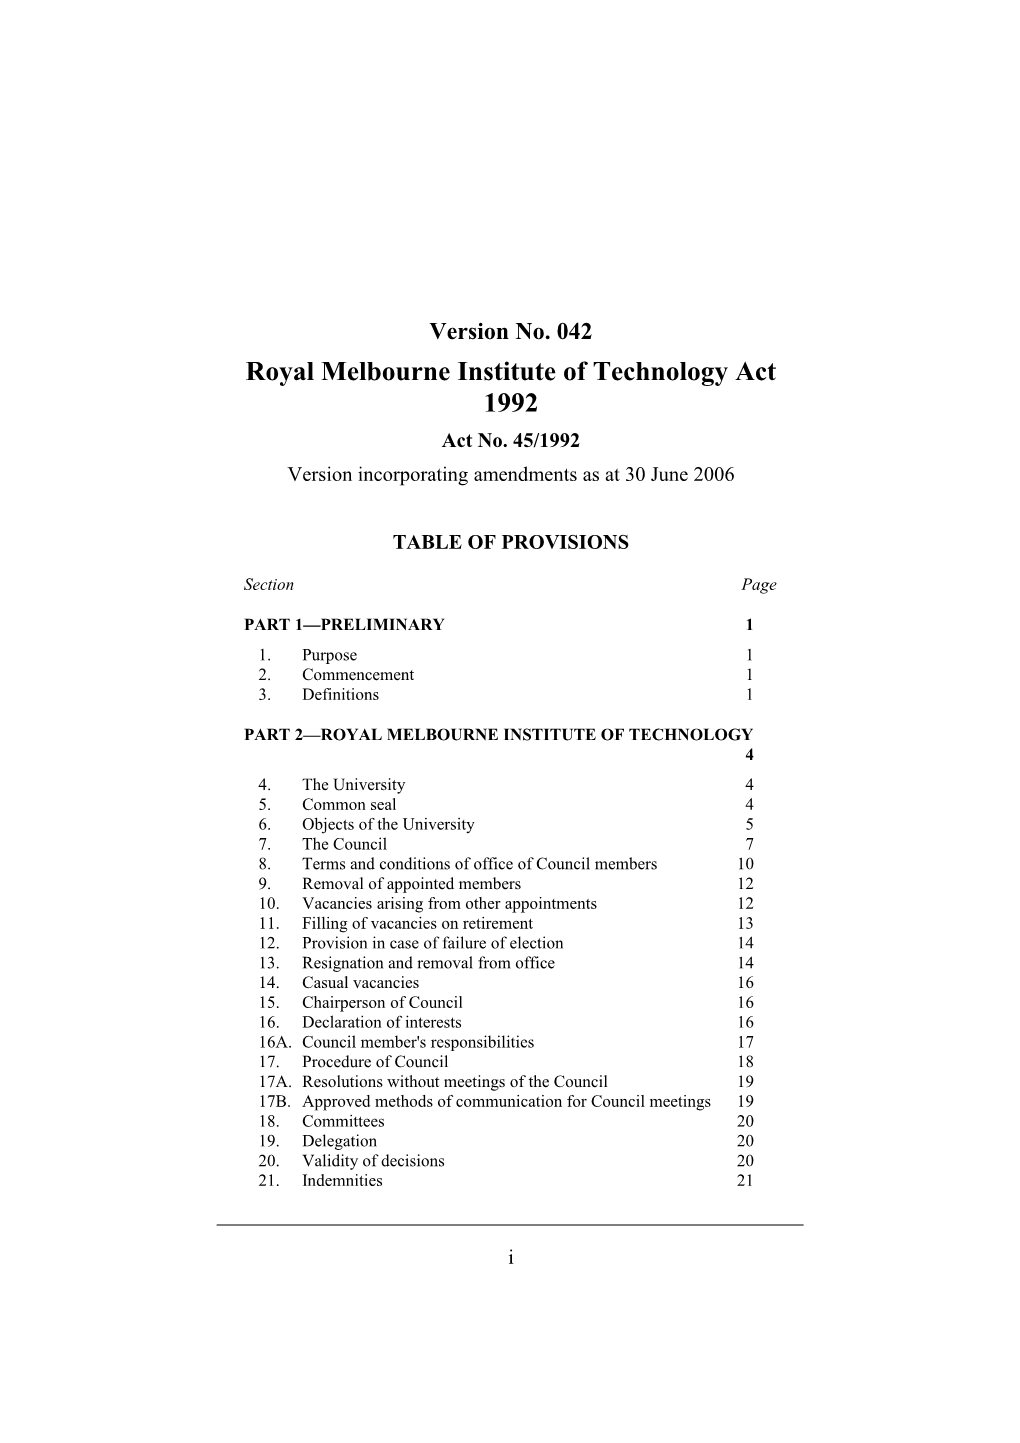 Royal Melbourne Institute of Technology Act 1992